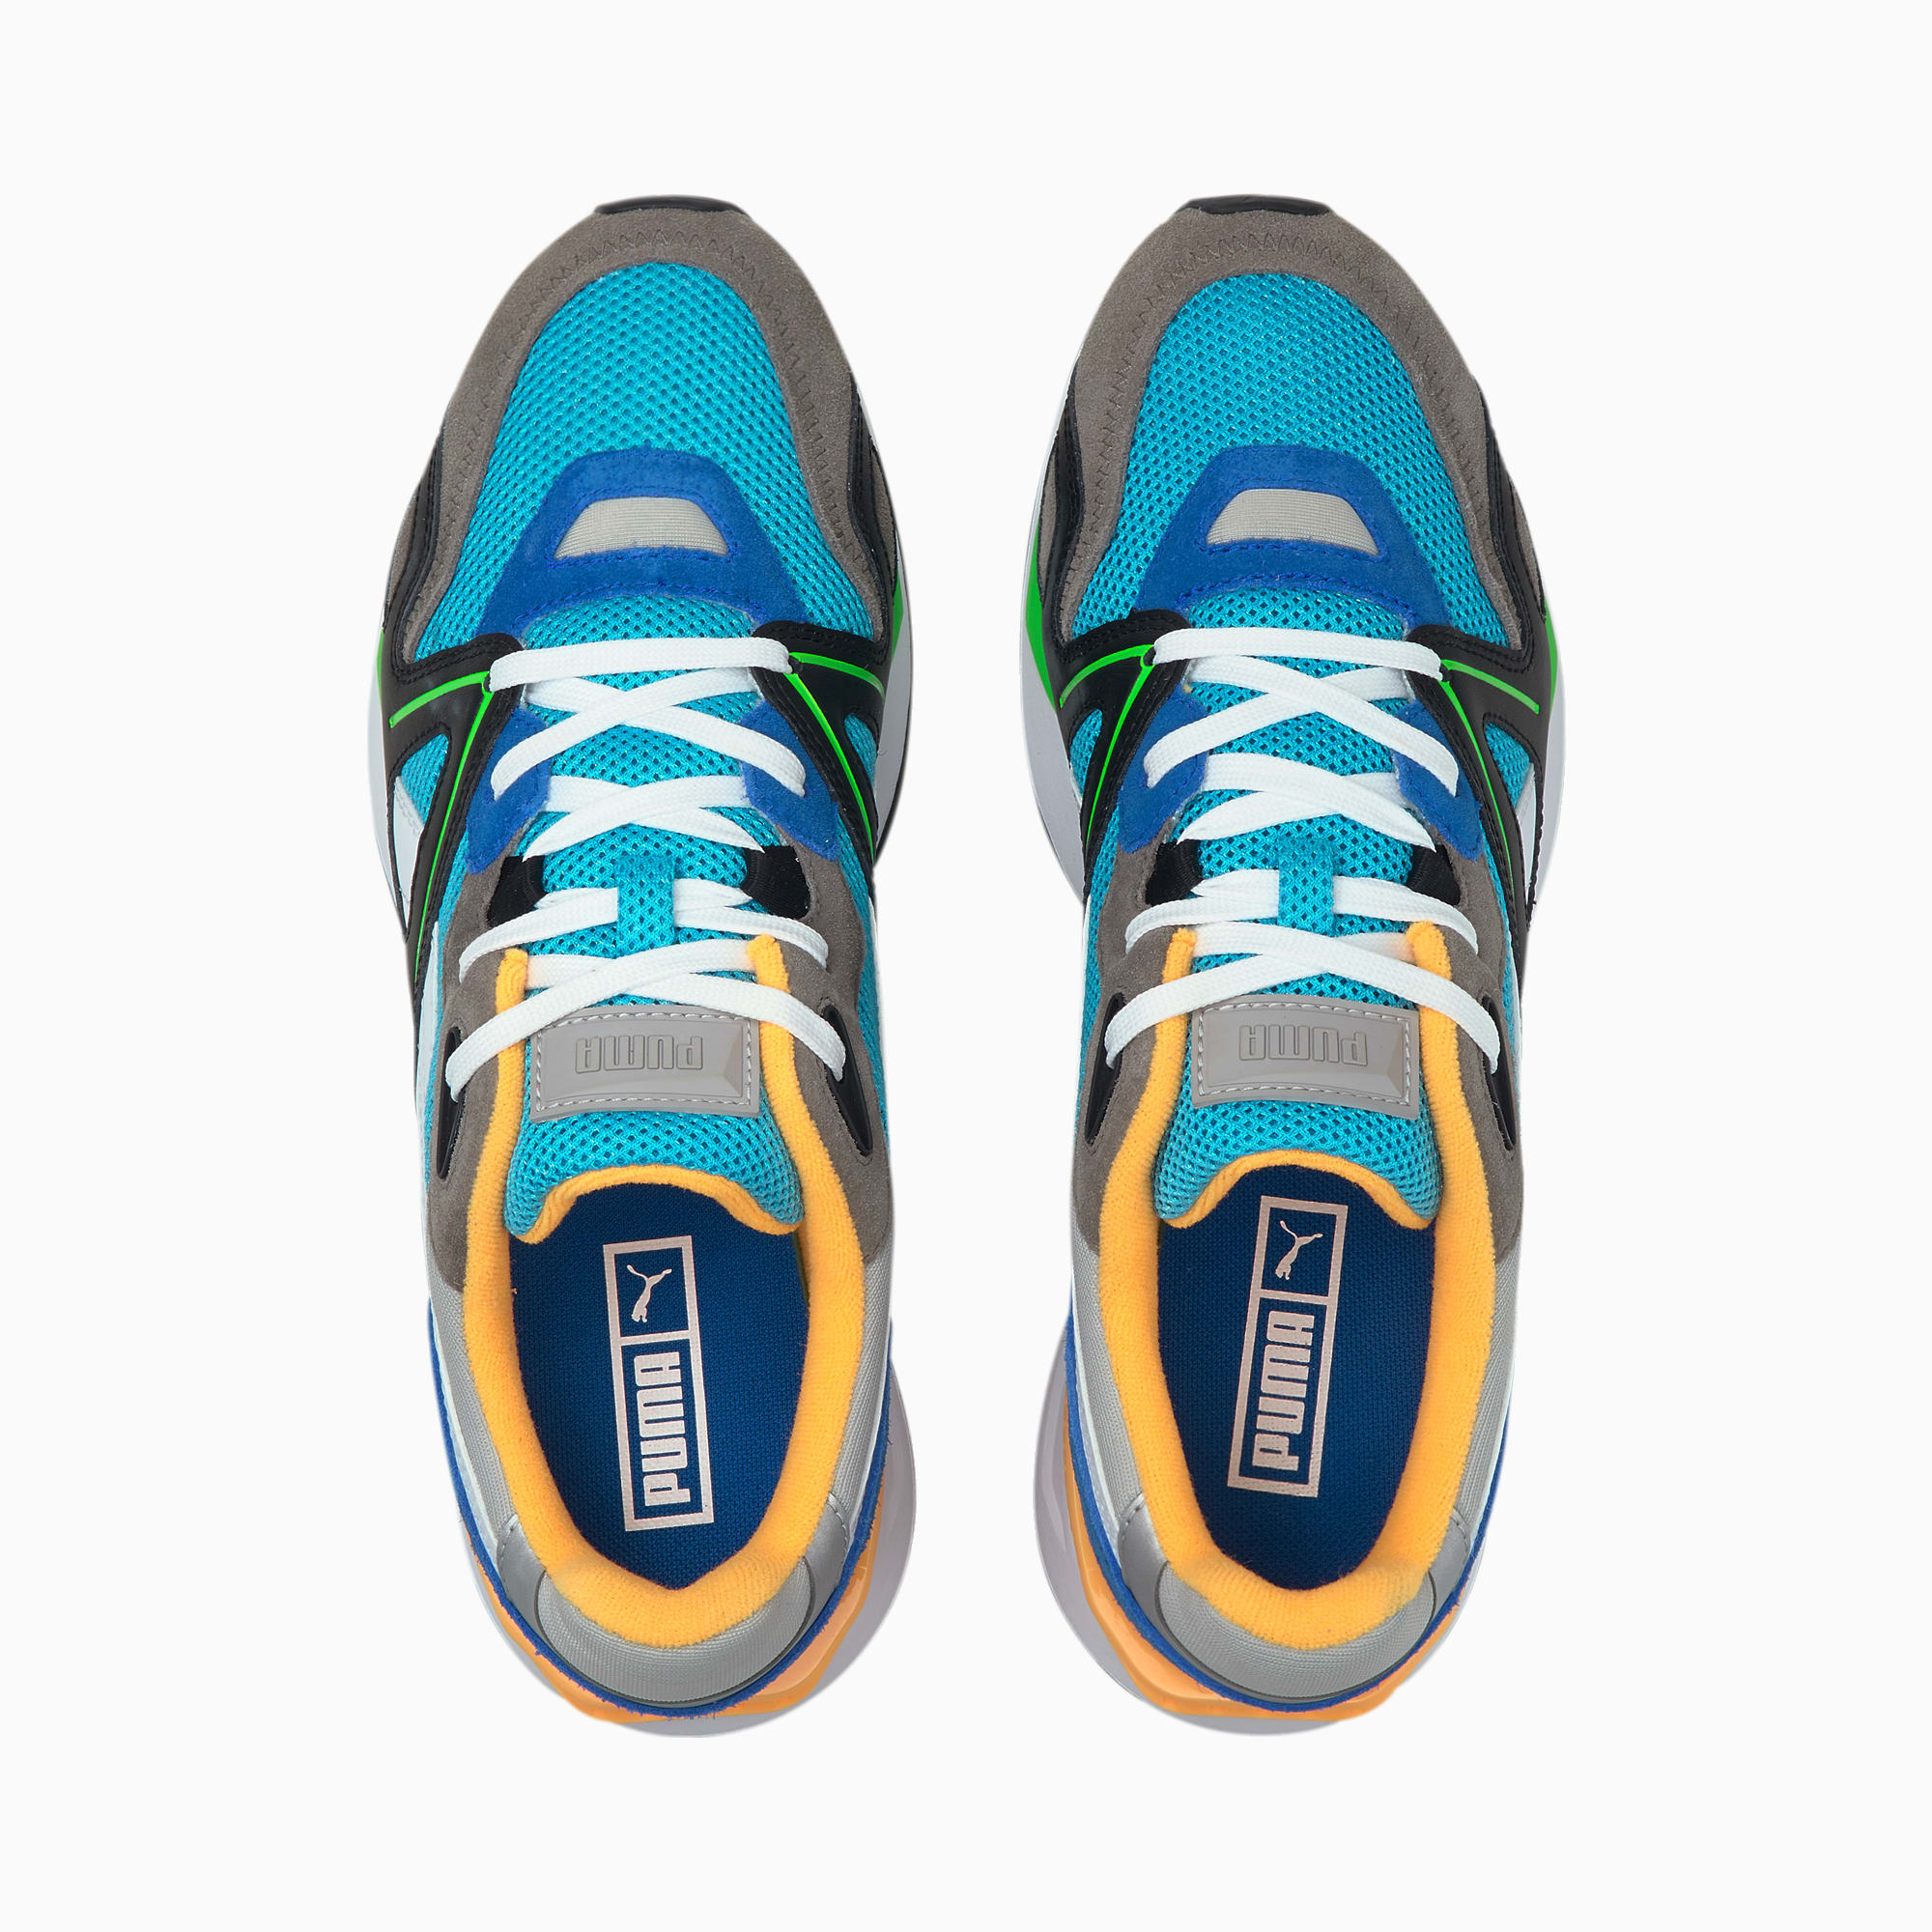 Mirage Mox Vision Sneakers